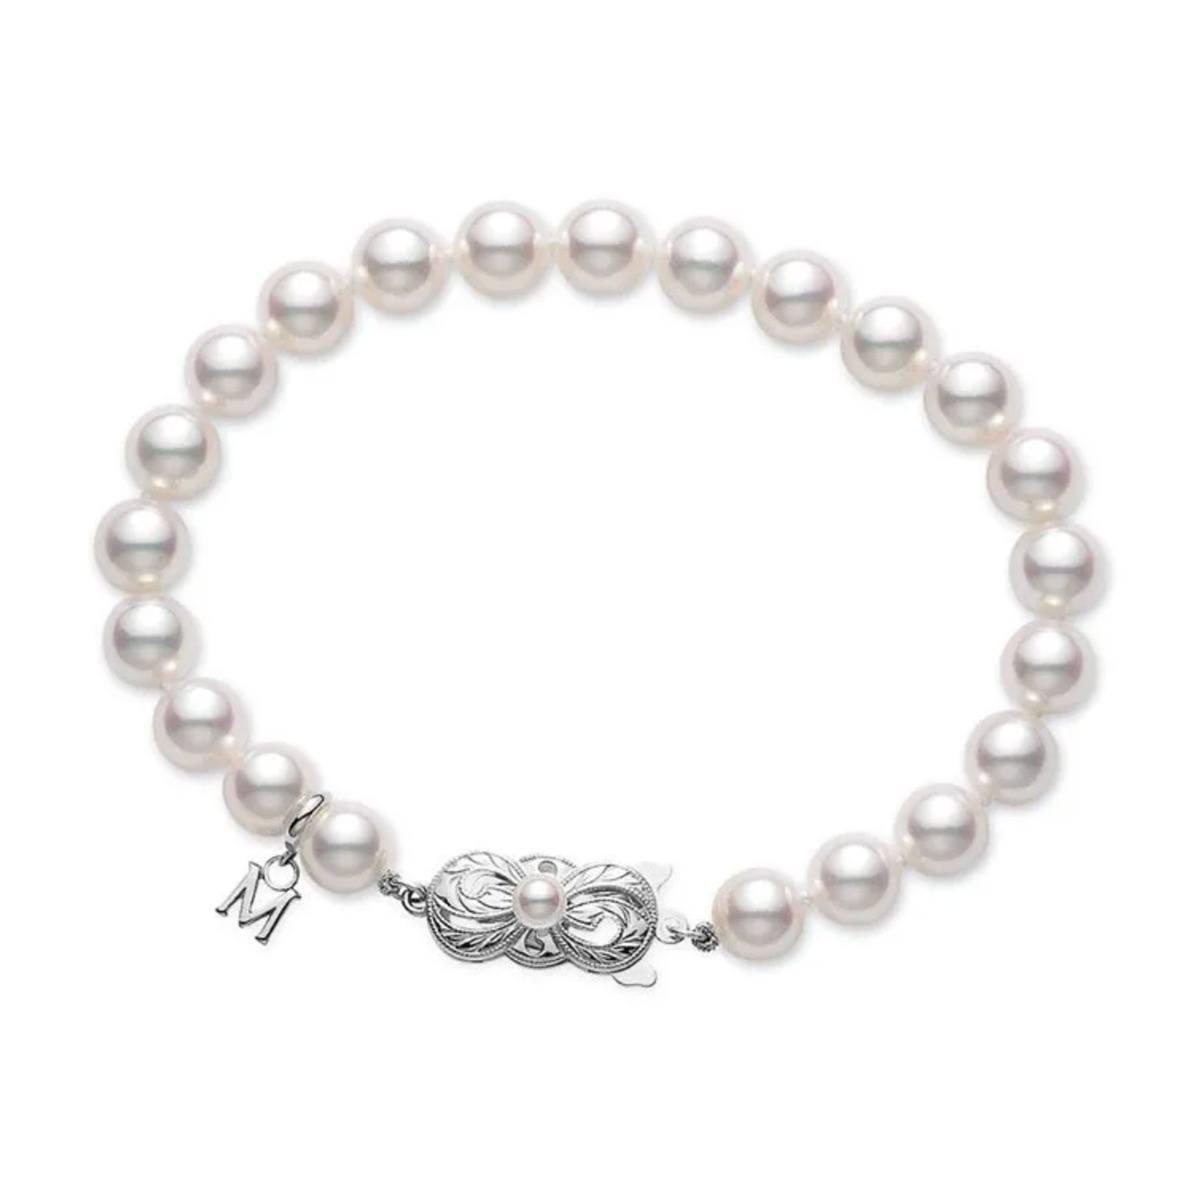 Mikimoto 7.5-7mm "A" Pearl Strand Bracelet in White Gold